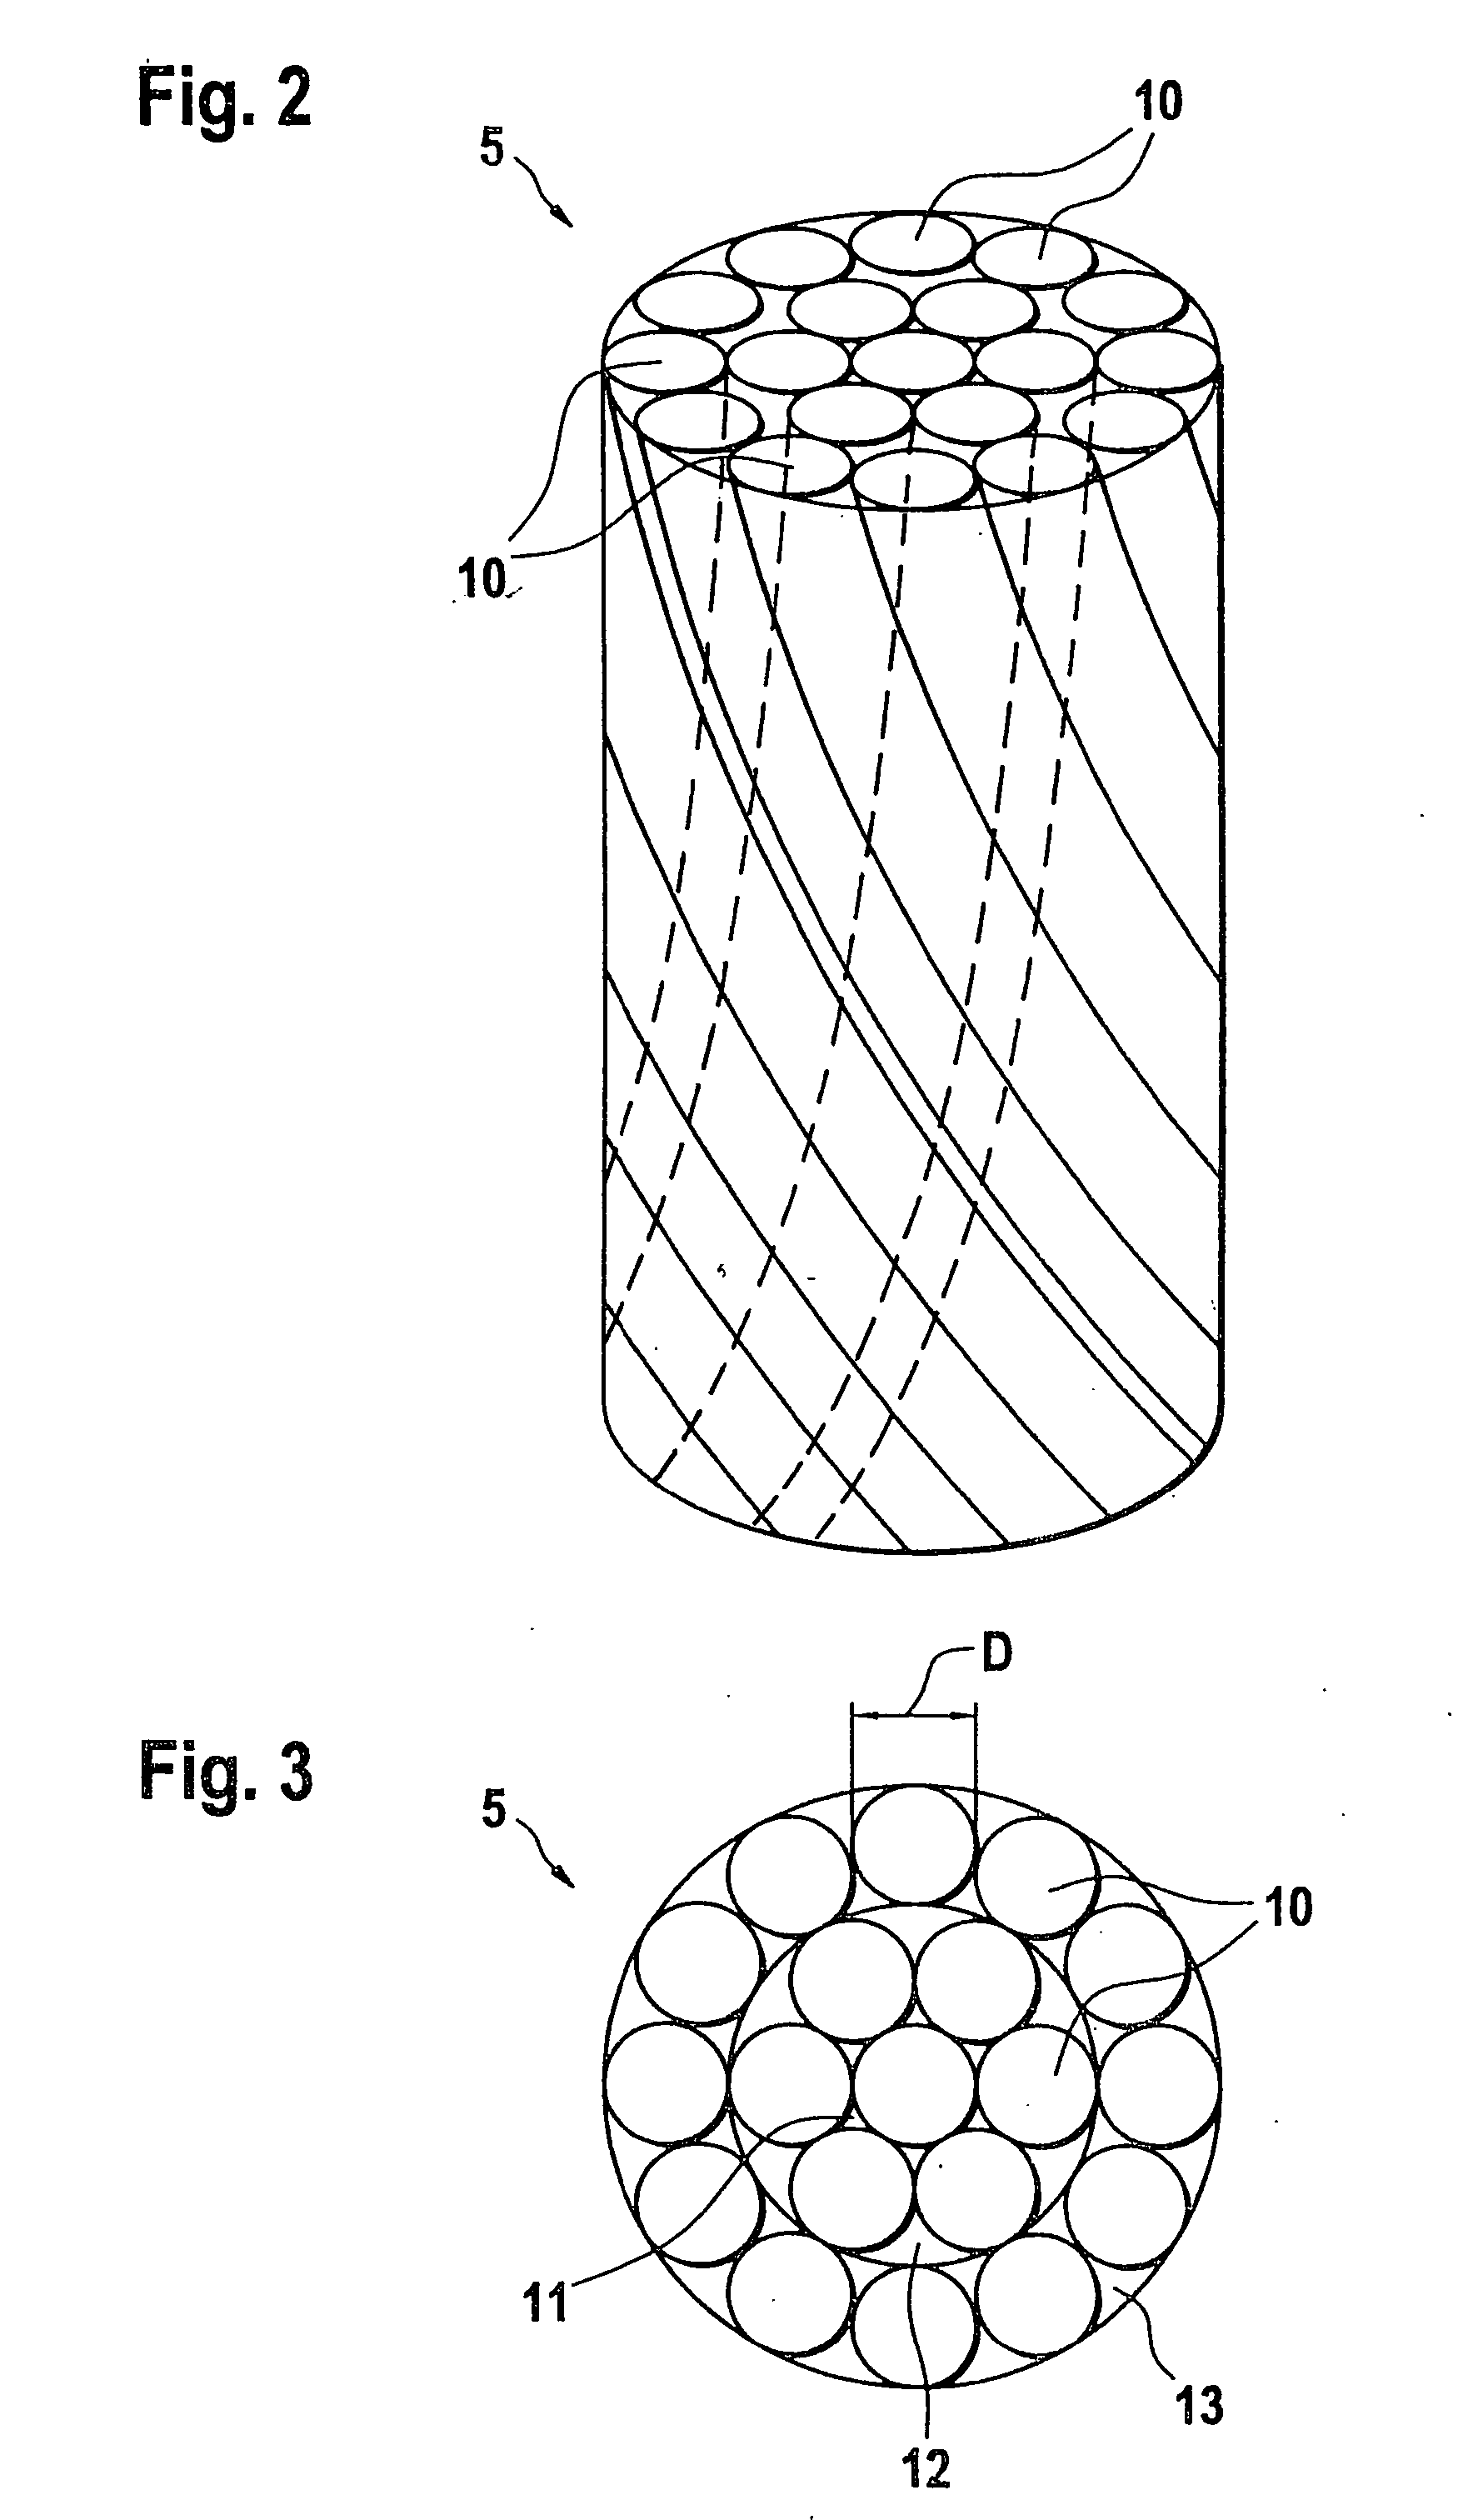 Apparatus for determining and/or monitoring the filling level of a product in a container